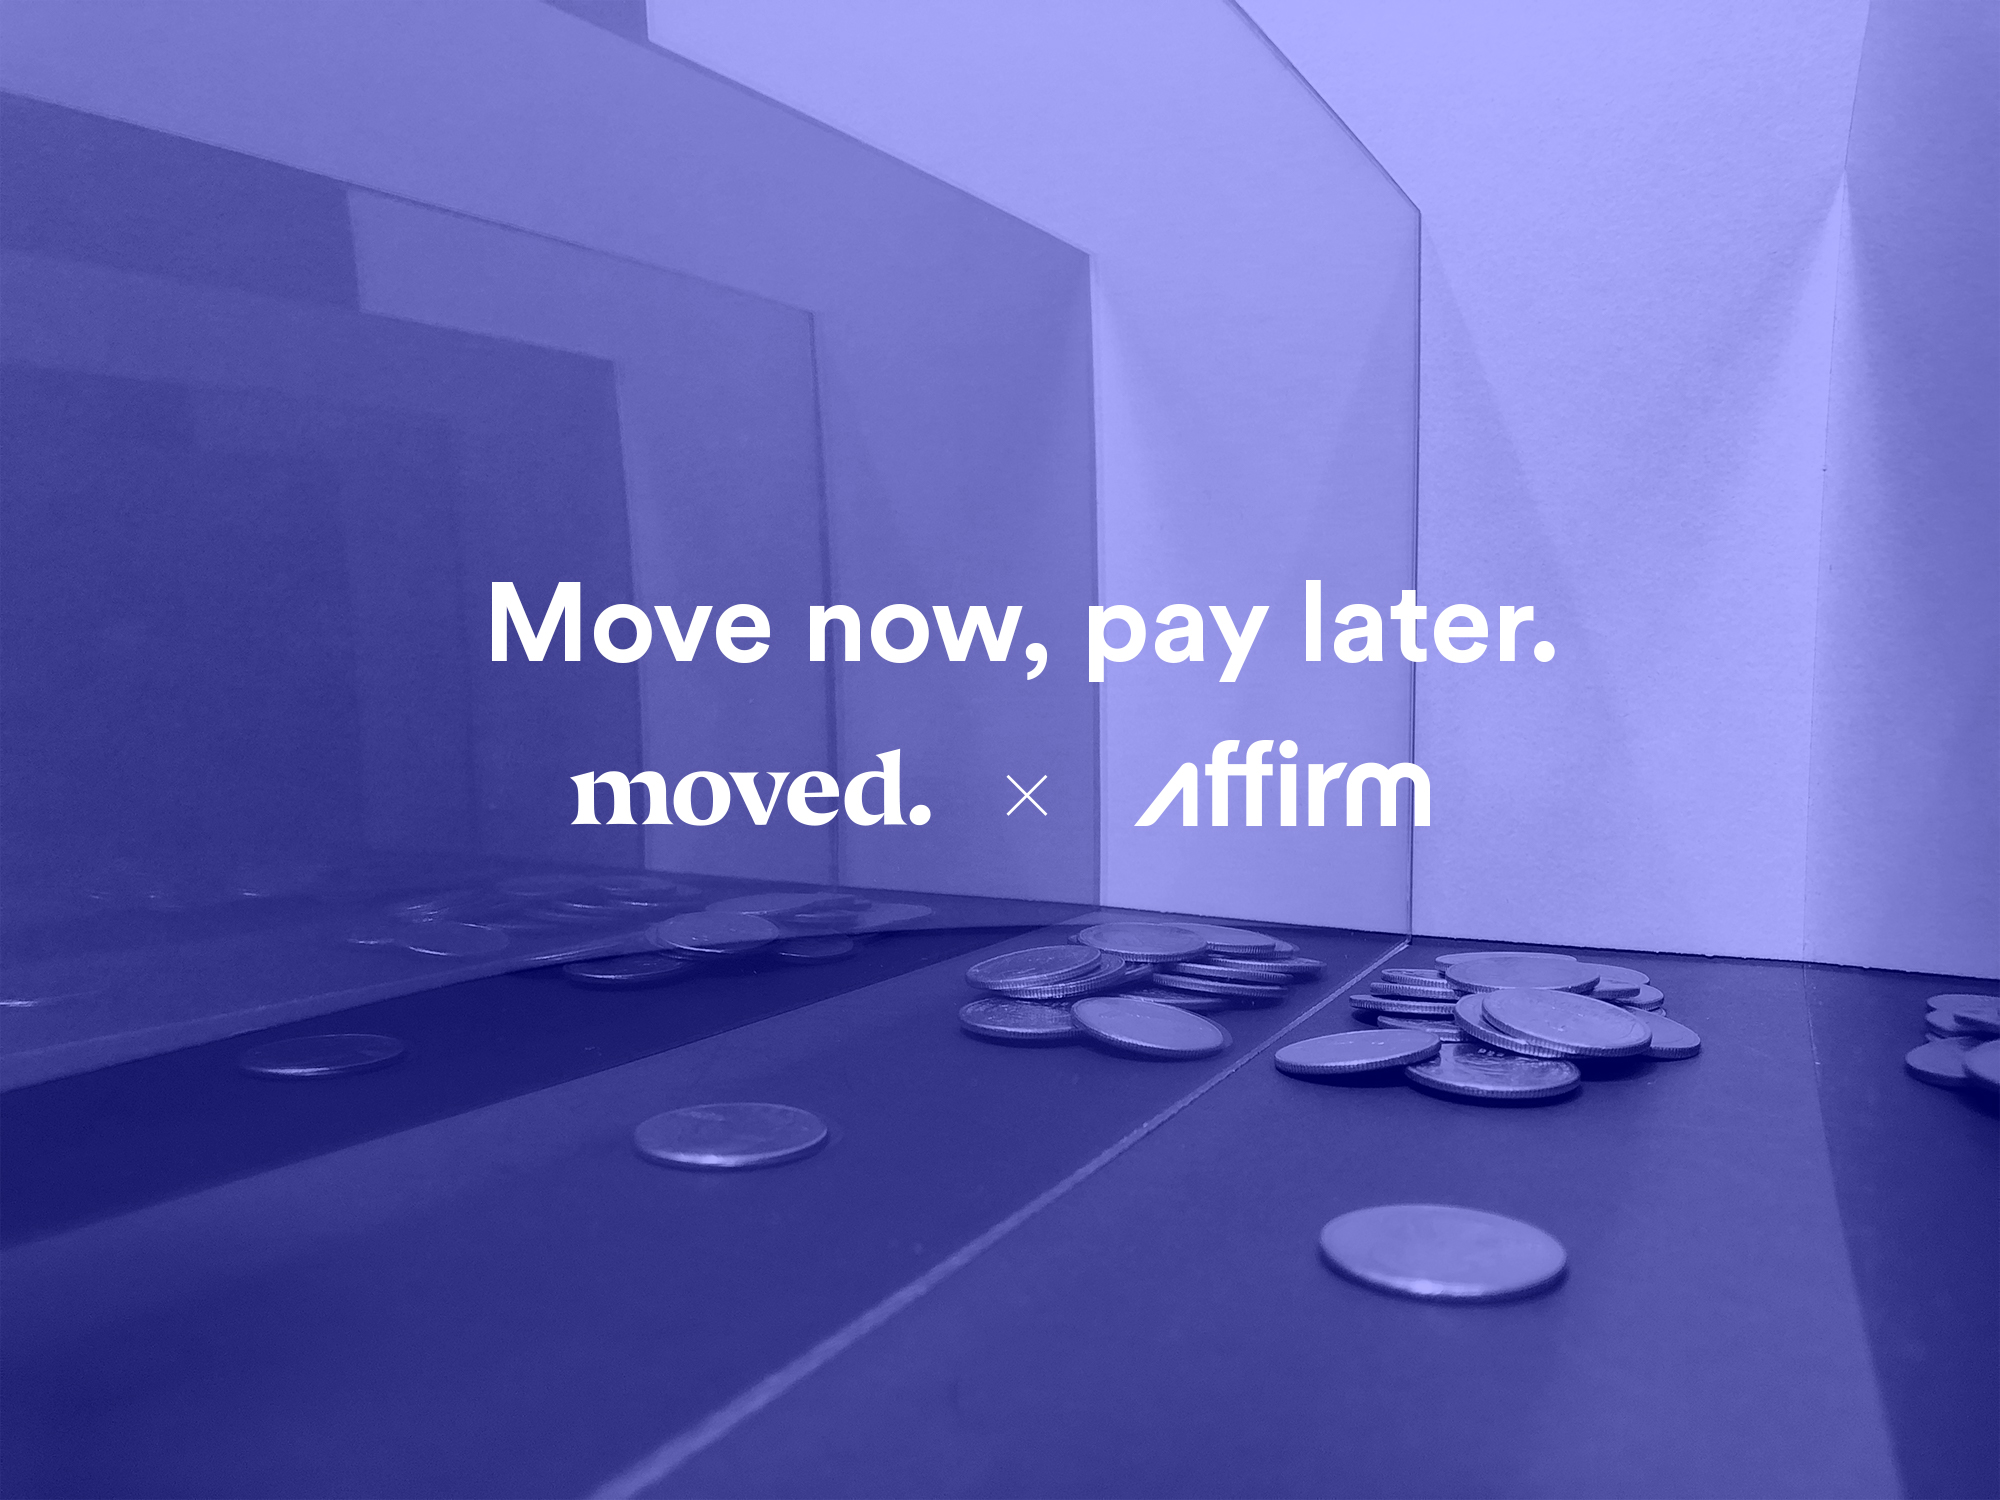 Finance Your Move – Moved x Affirm